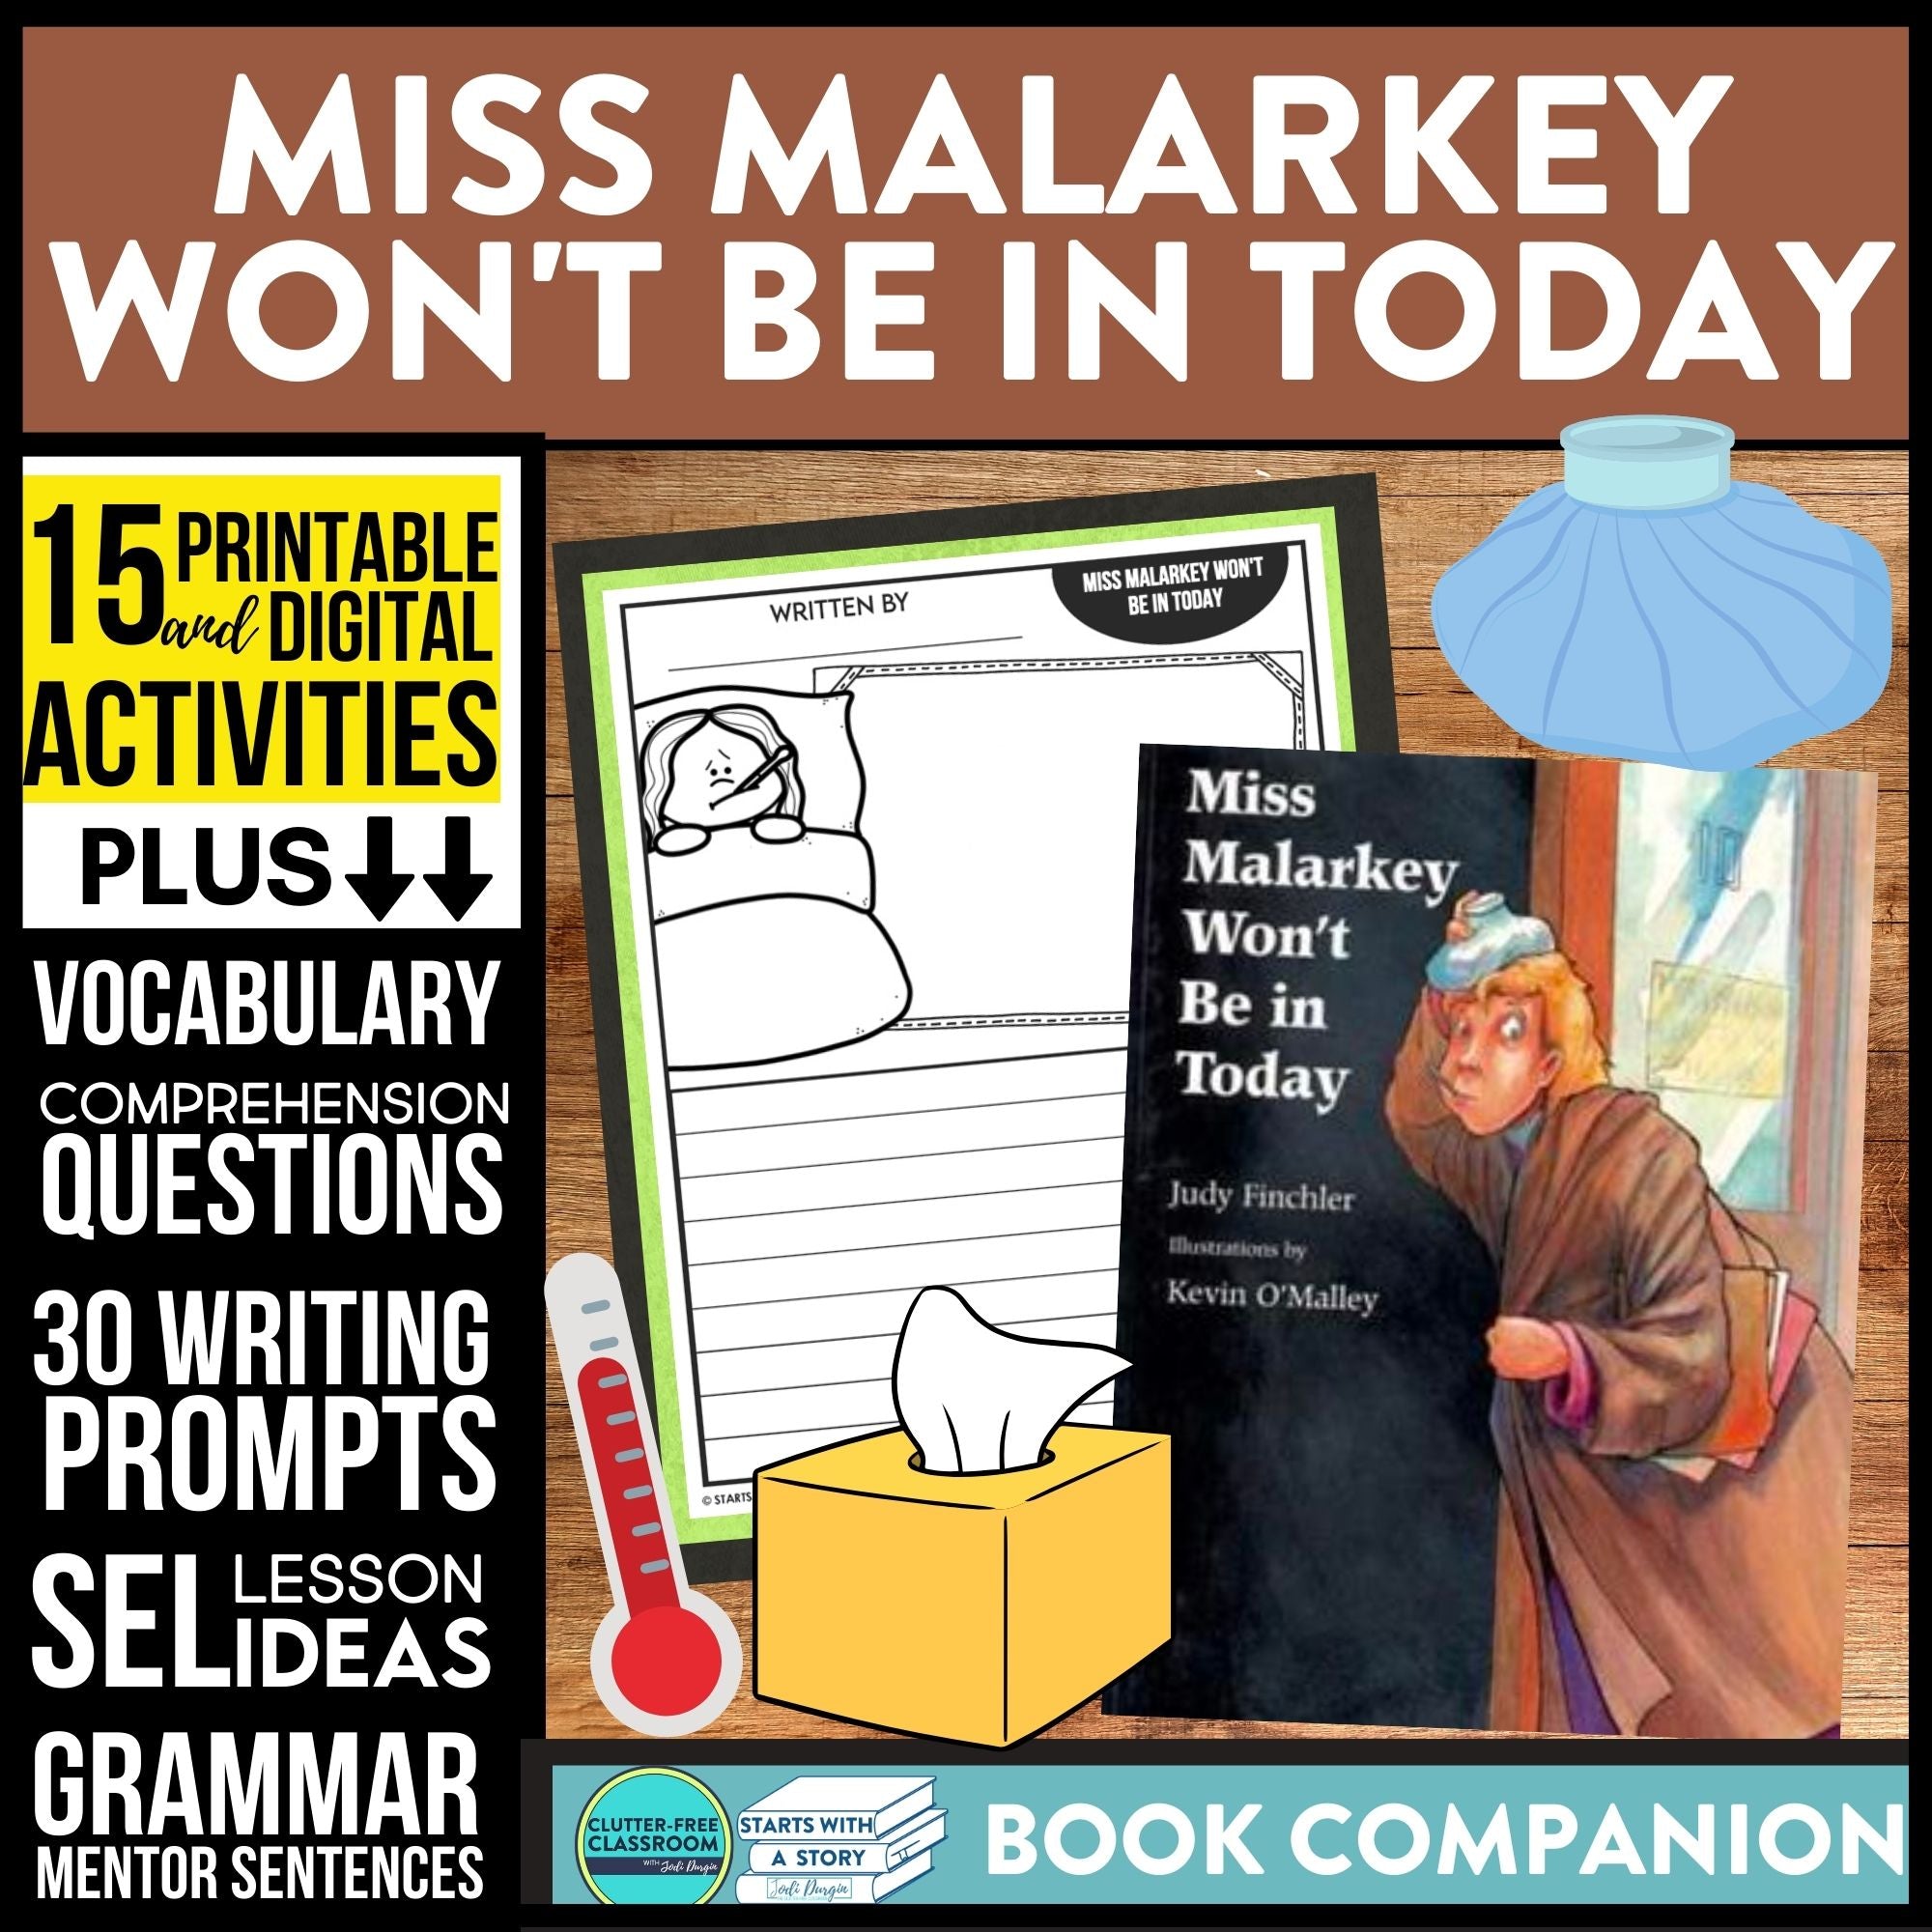 MISS MALARKEY WON'T BE IN TODAY activities and lesson plan ideas